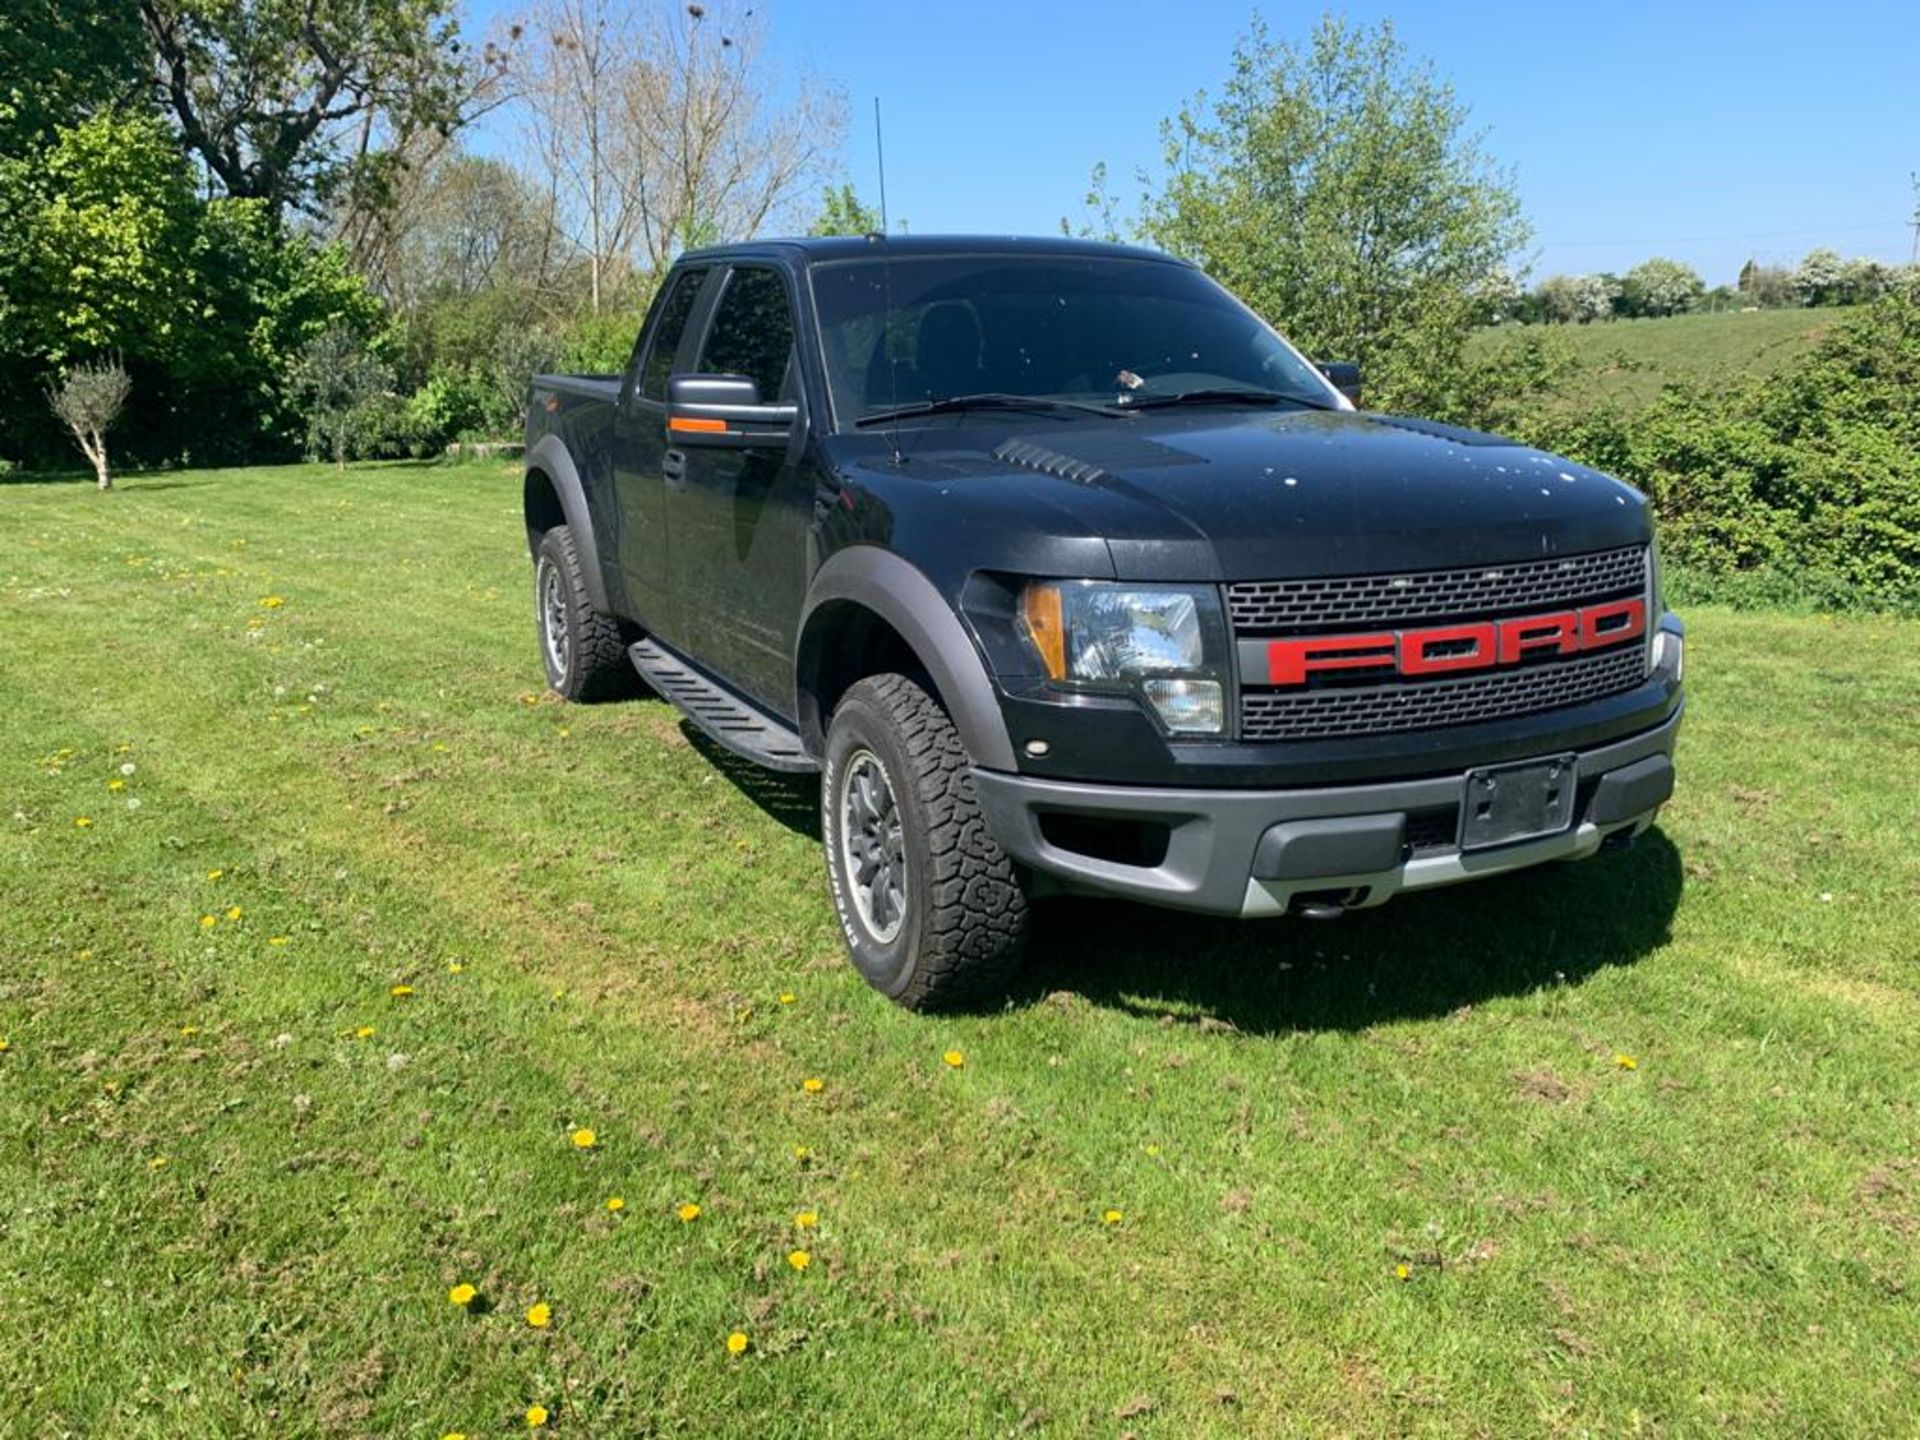 2012 FORD F-150 RAPTOR - 65,000 MILES, LOTS OF UPGRADED PARTS, READY IN UK WITH NOVA APPLICATION - Image 5 of 18